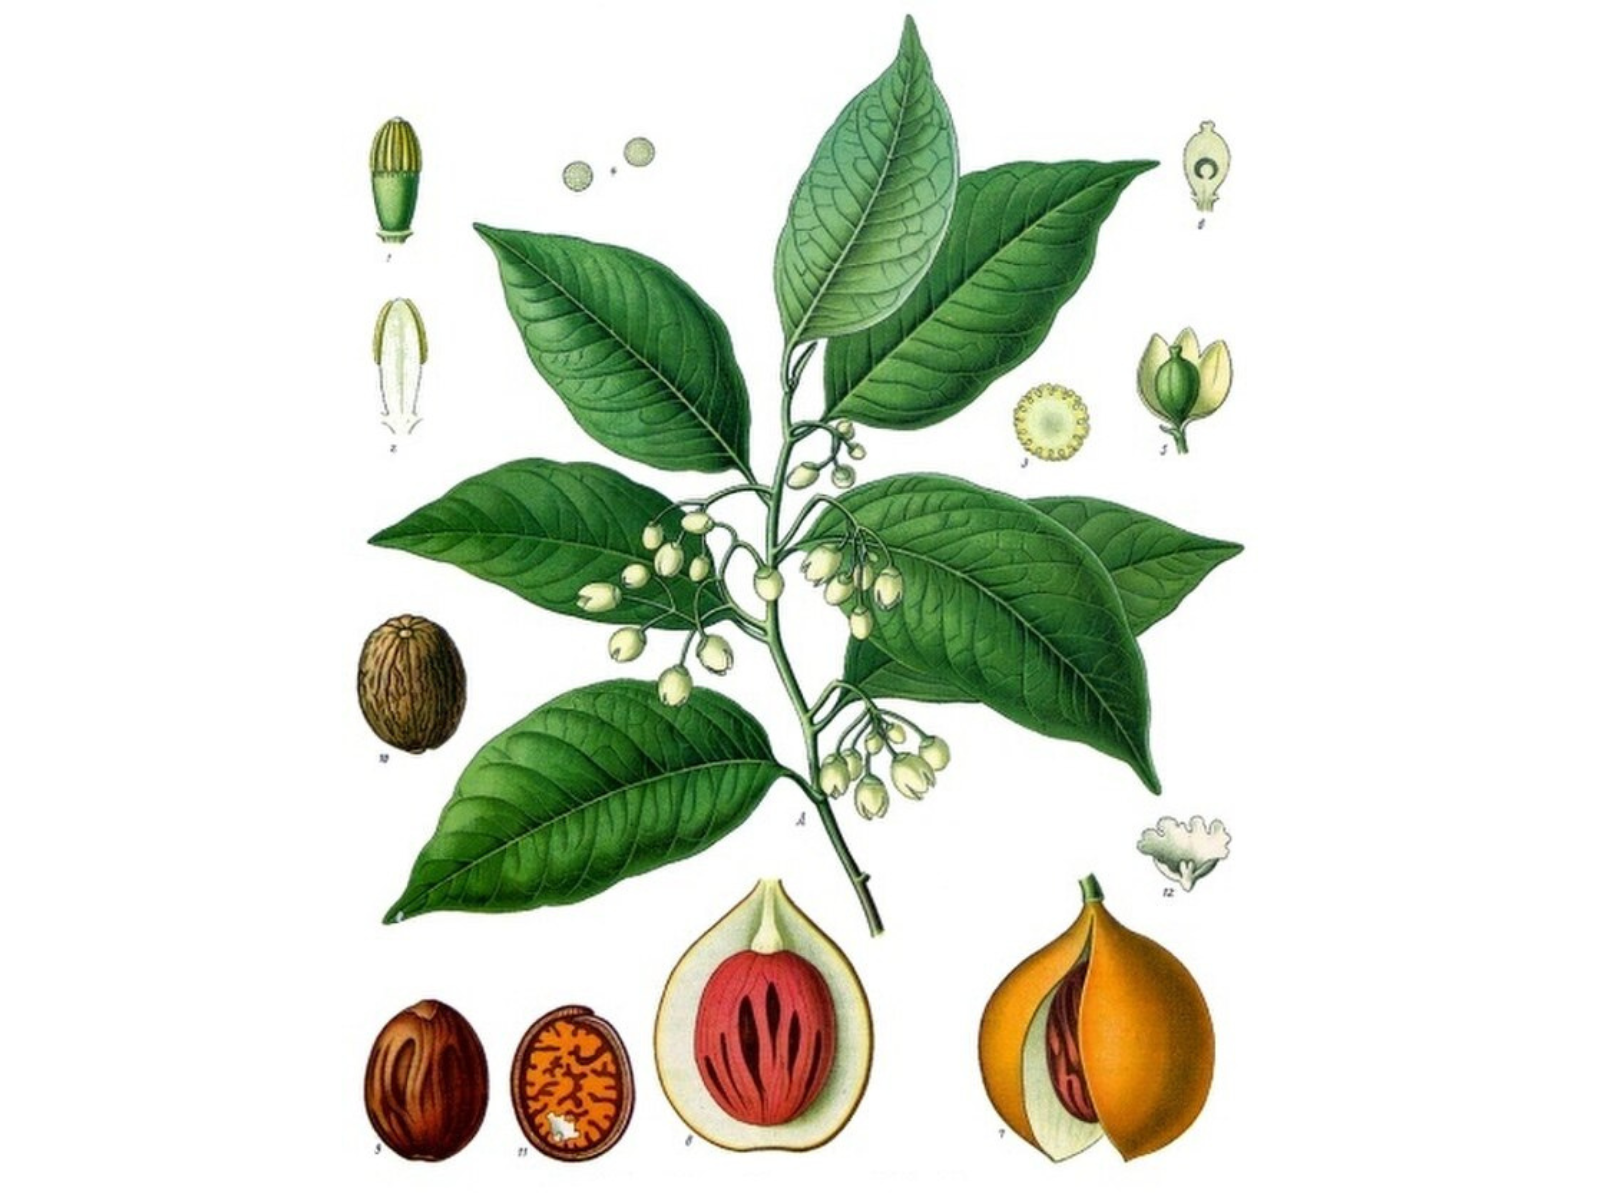 An illustration of the elements of a nutmeg plant, from seeds to flowers.